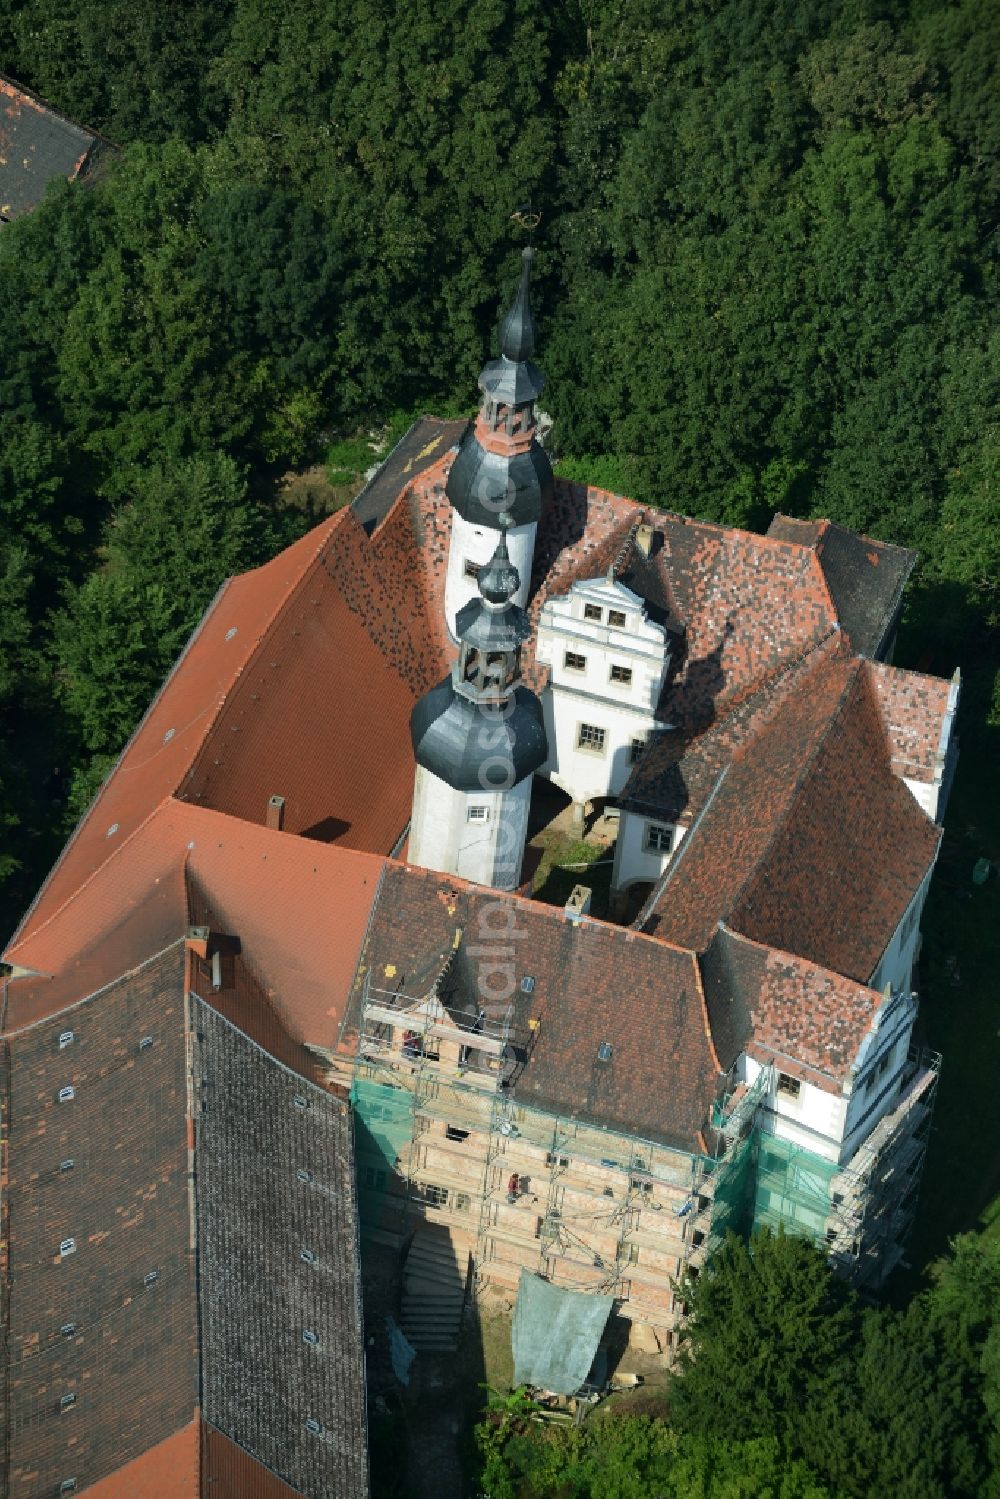 Aerial photograph Zschepplin - Building and Park of Castle Zschepplin in Zschepplin in the state of Saxony. The castle with its church, yard and towers is located in a forest on the edge of Zschepplin